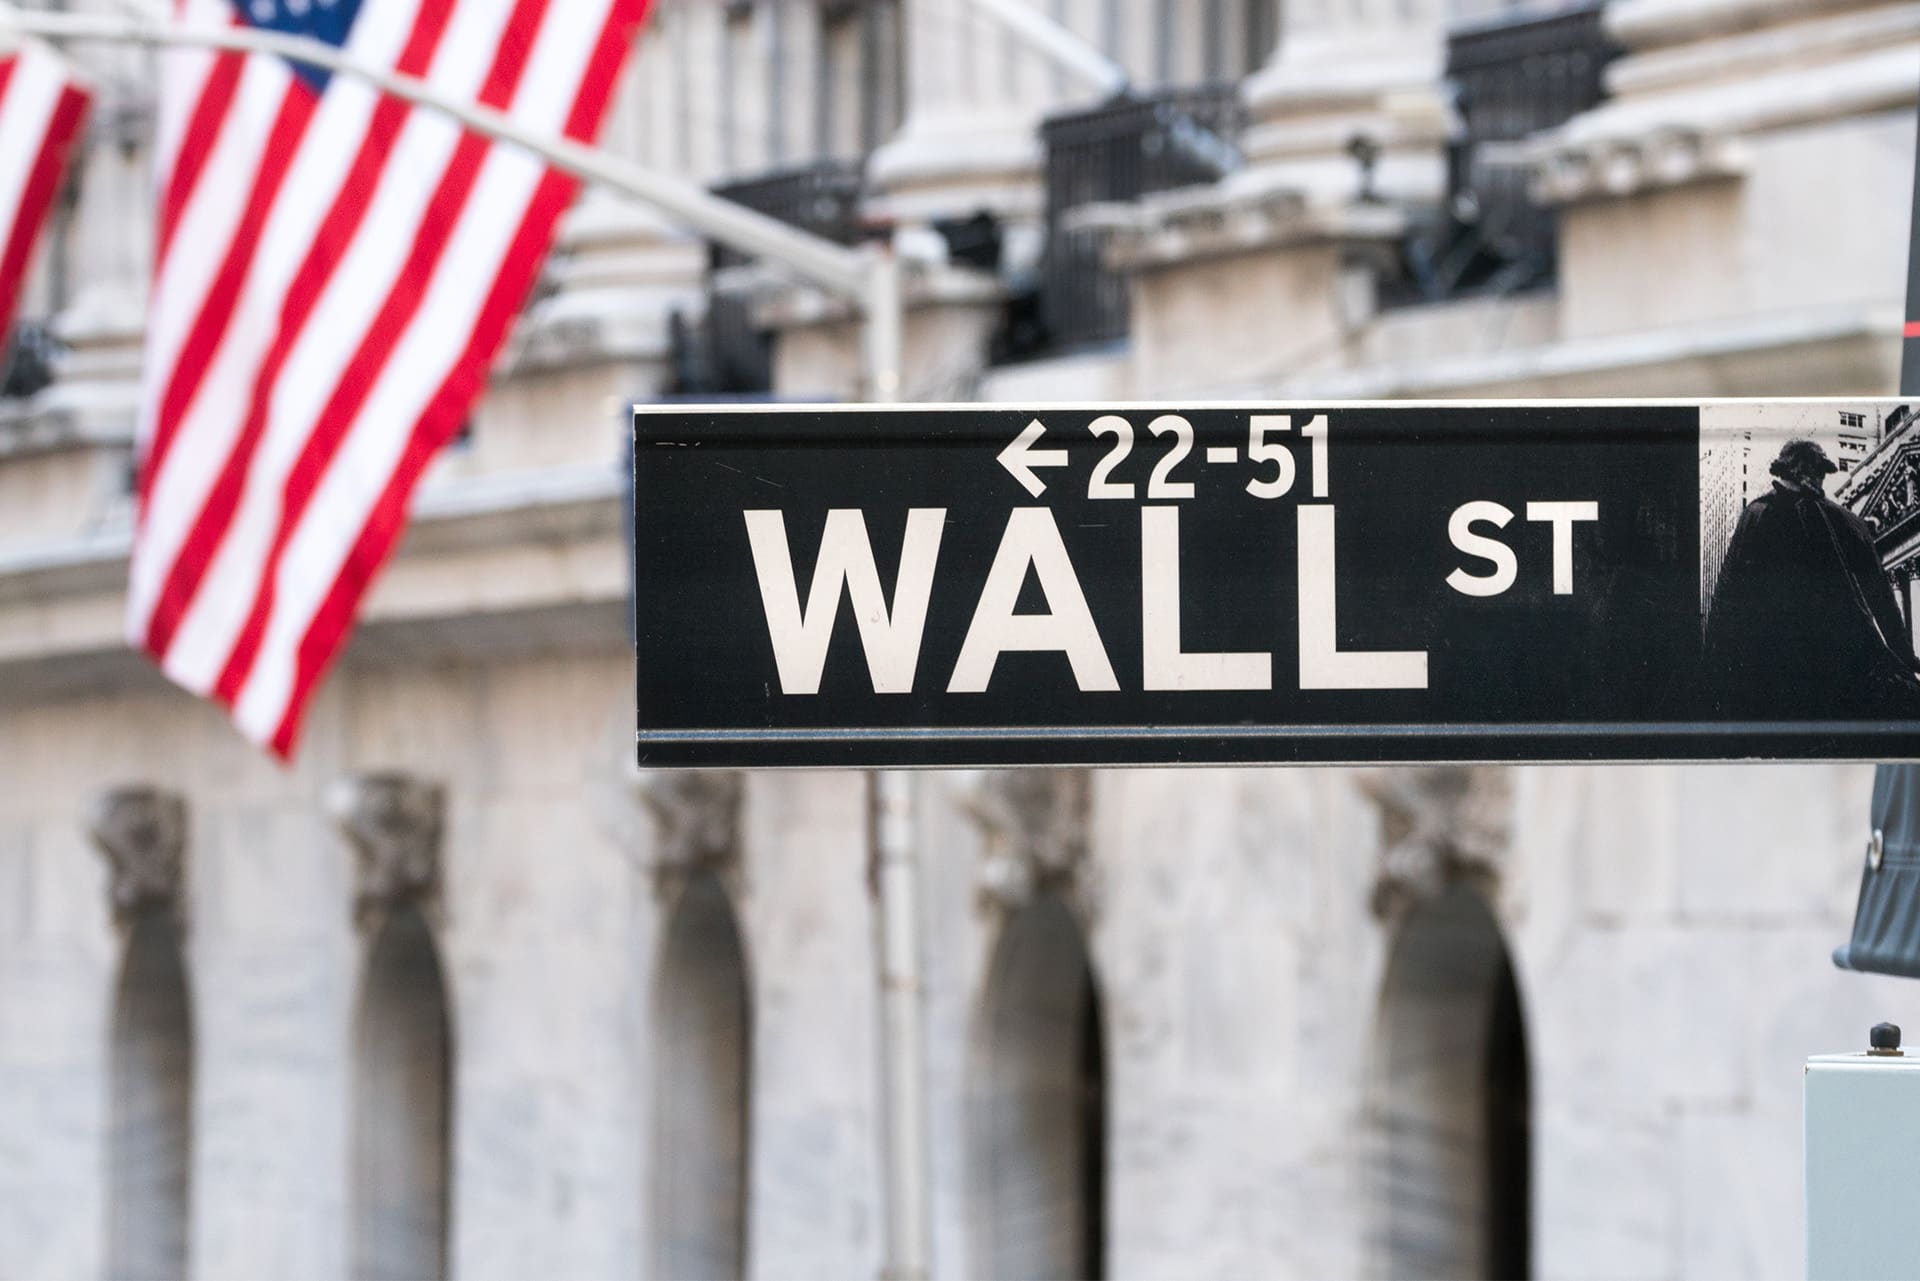 Close-up of a Wall Street sign with an American flag in the background, positioned near the New York Stock Exchange building. The sign indicates addresses from 22 to 51. The background is slightly blurred, focusing attention on the sign and flag.